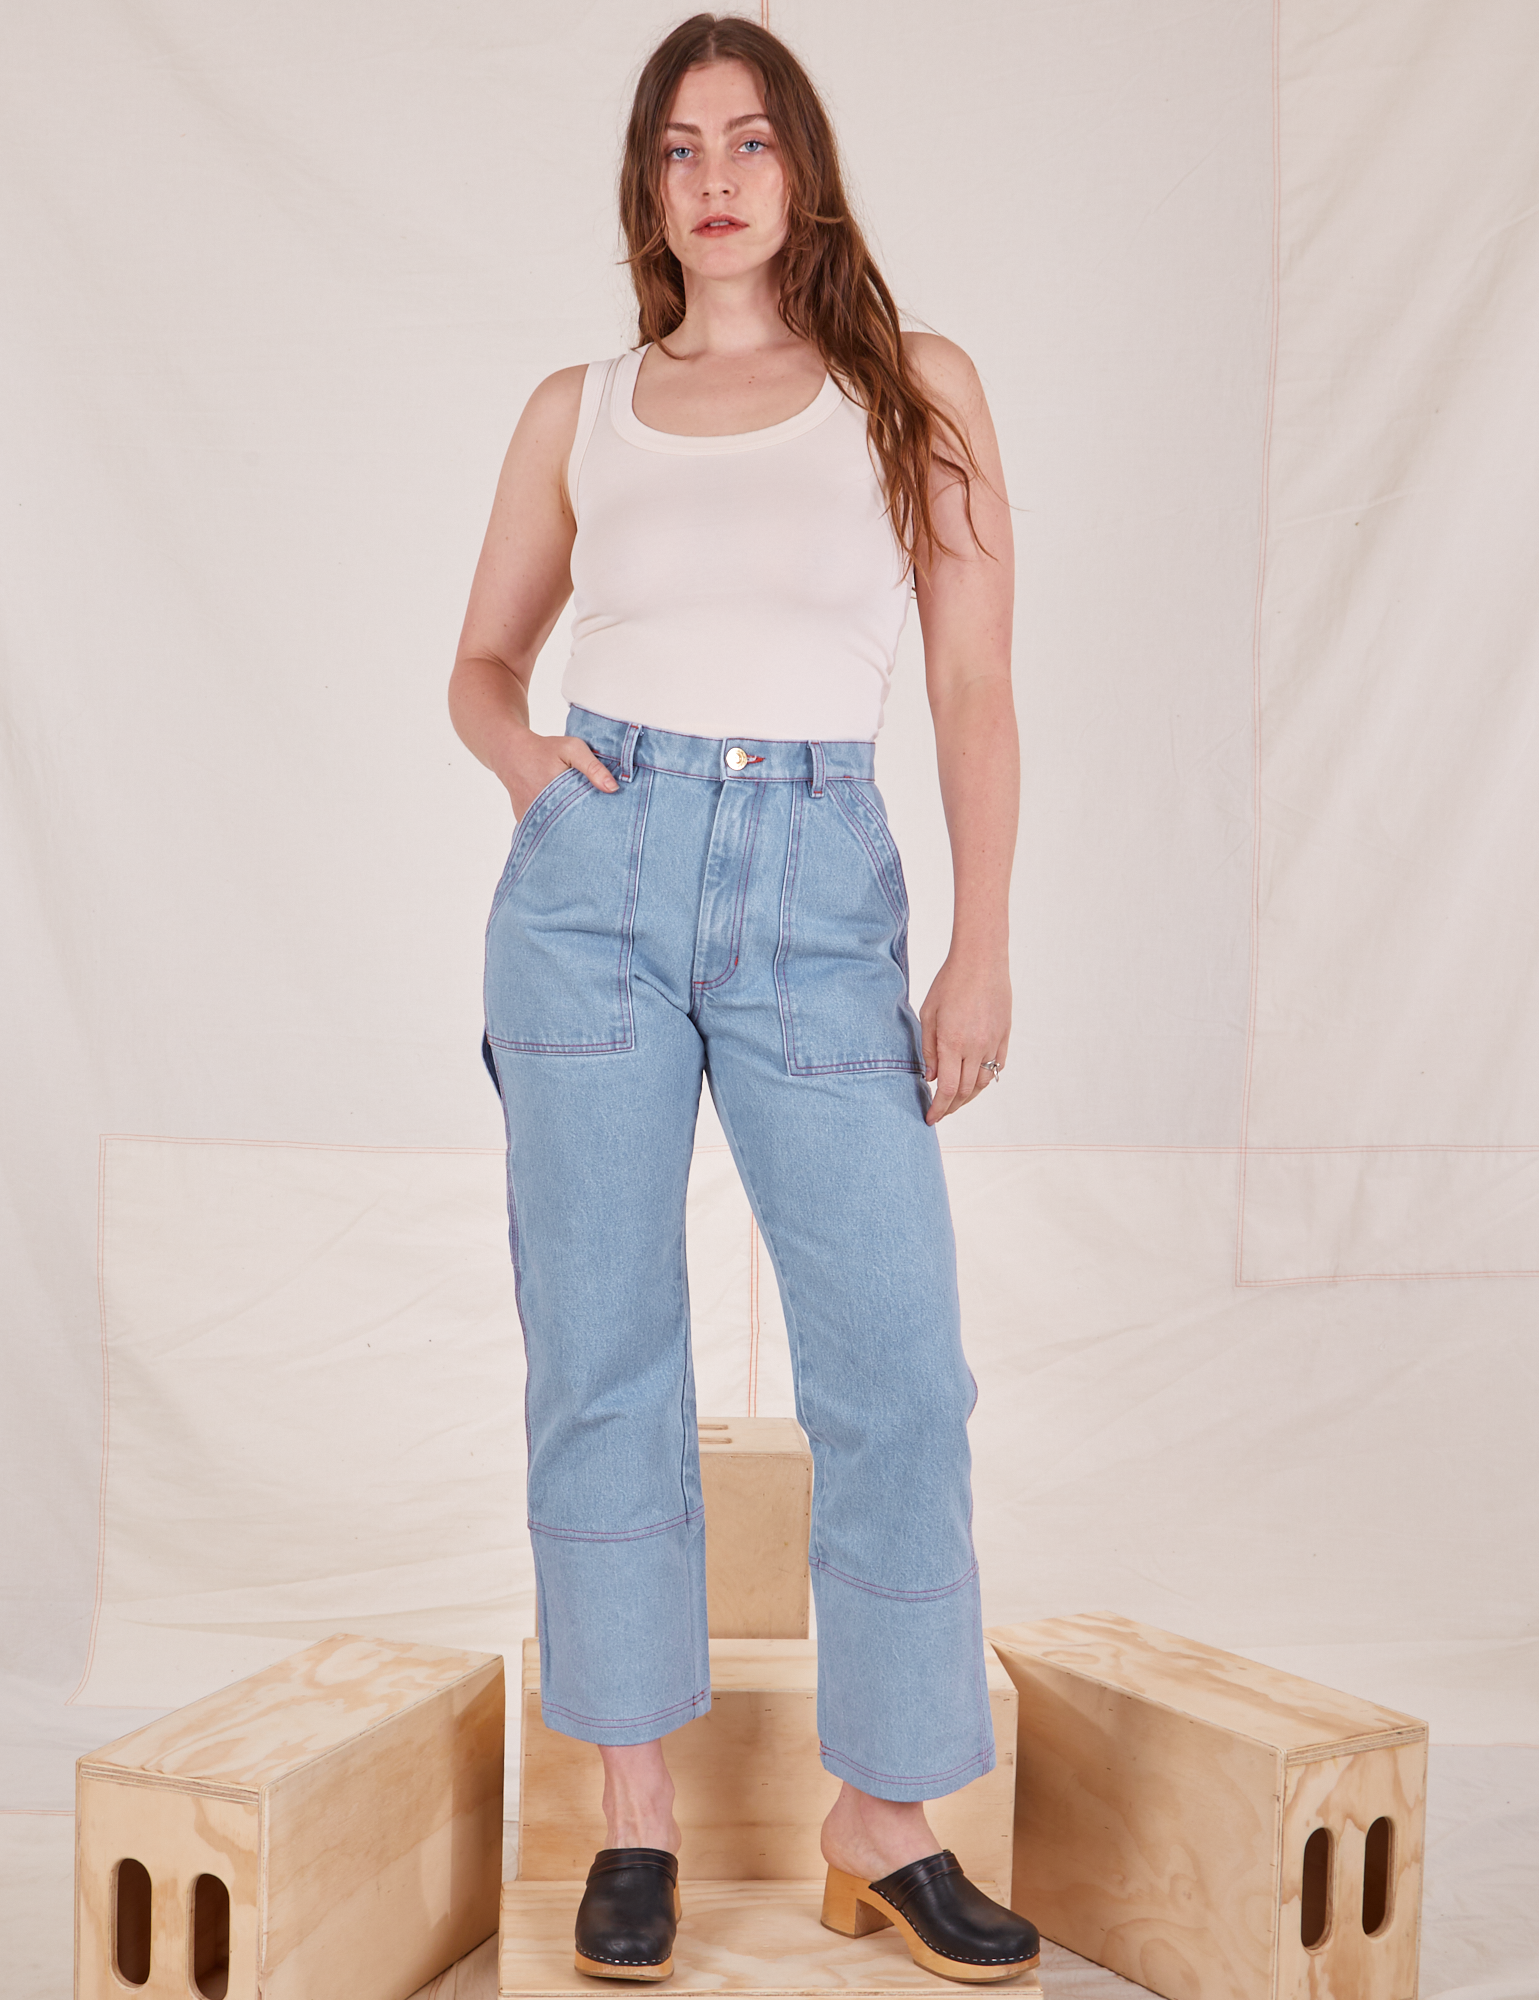 Allison is 5&#39;10&quot; and wearing S Carpenter Jeans in Light Wash paired with Tank Top in vintage tee off-white